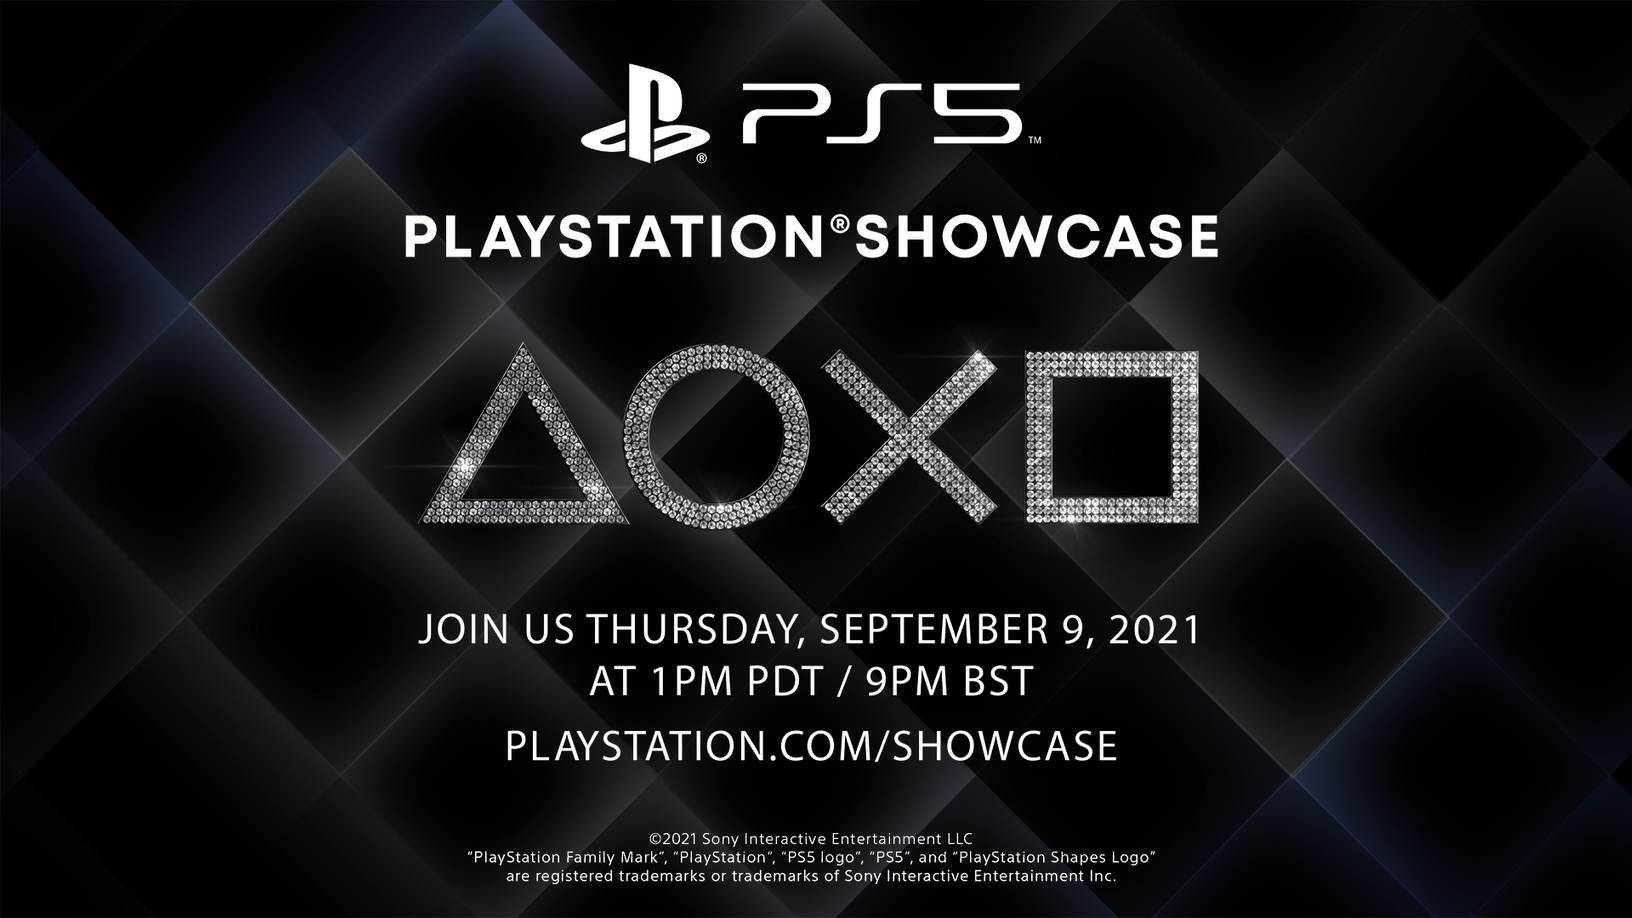 PlayStation Showcase next week will offer 'a look into the future of